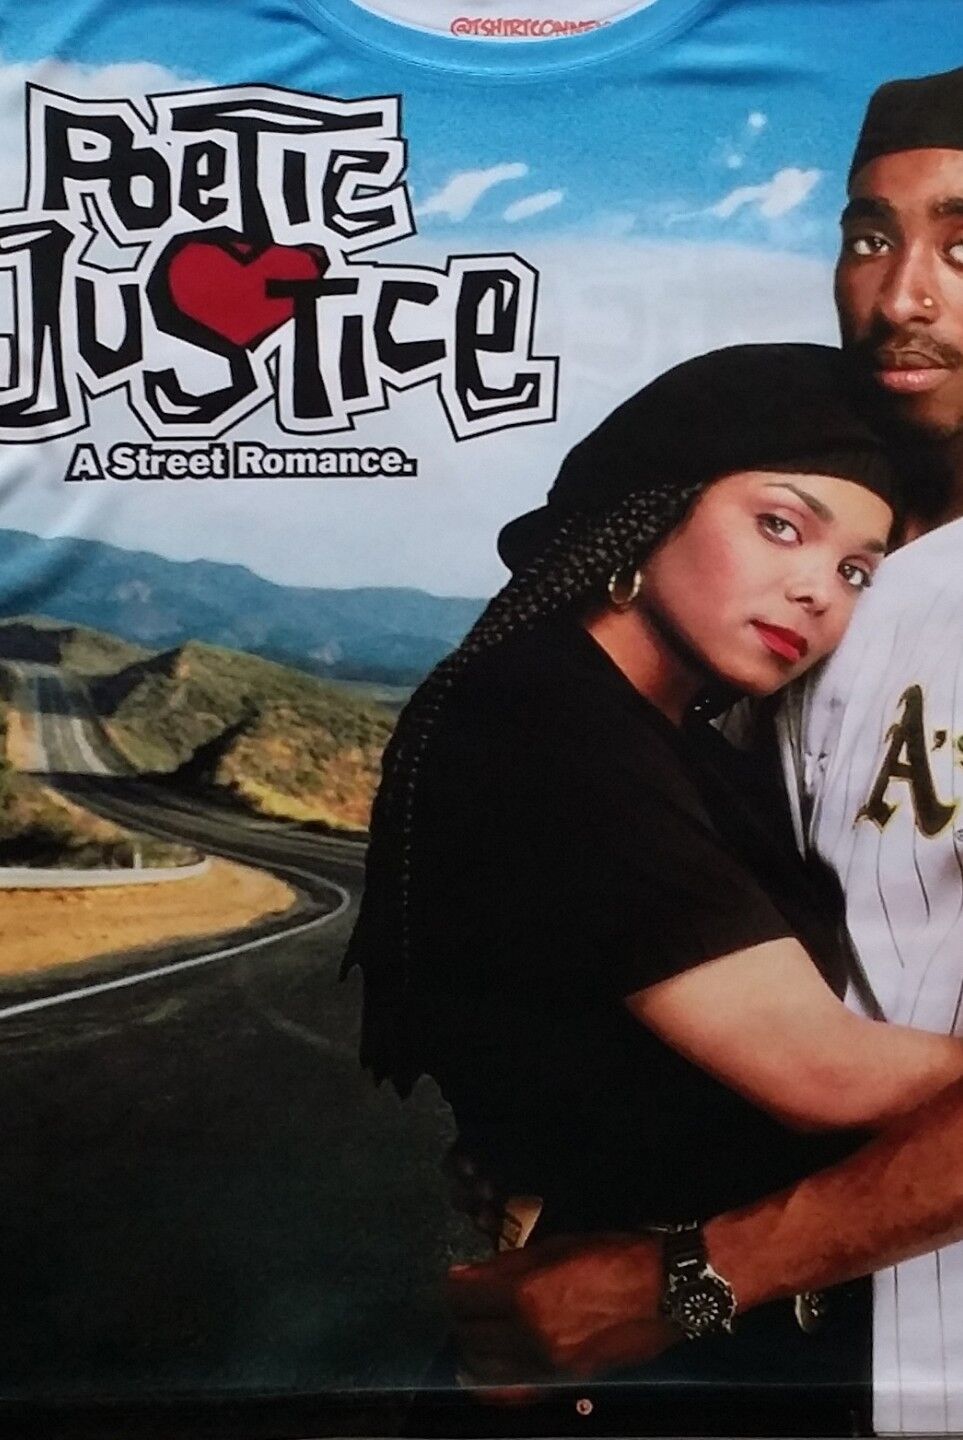 Poetic Justice